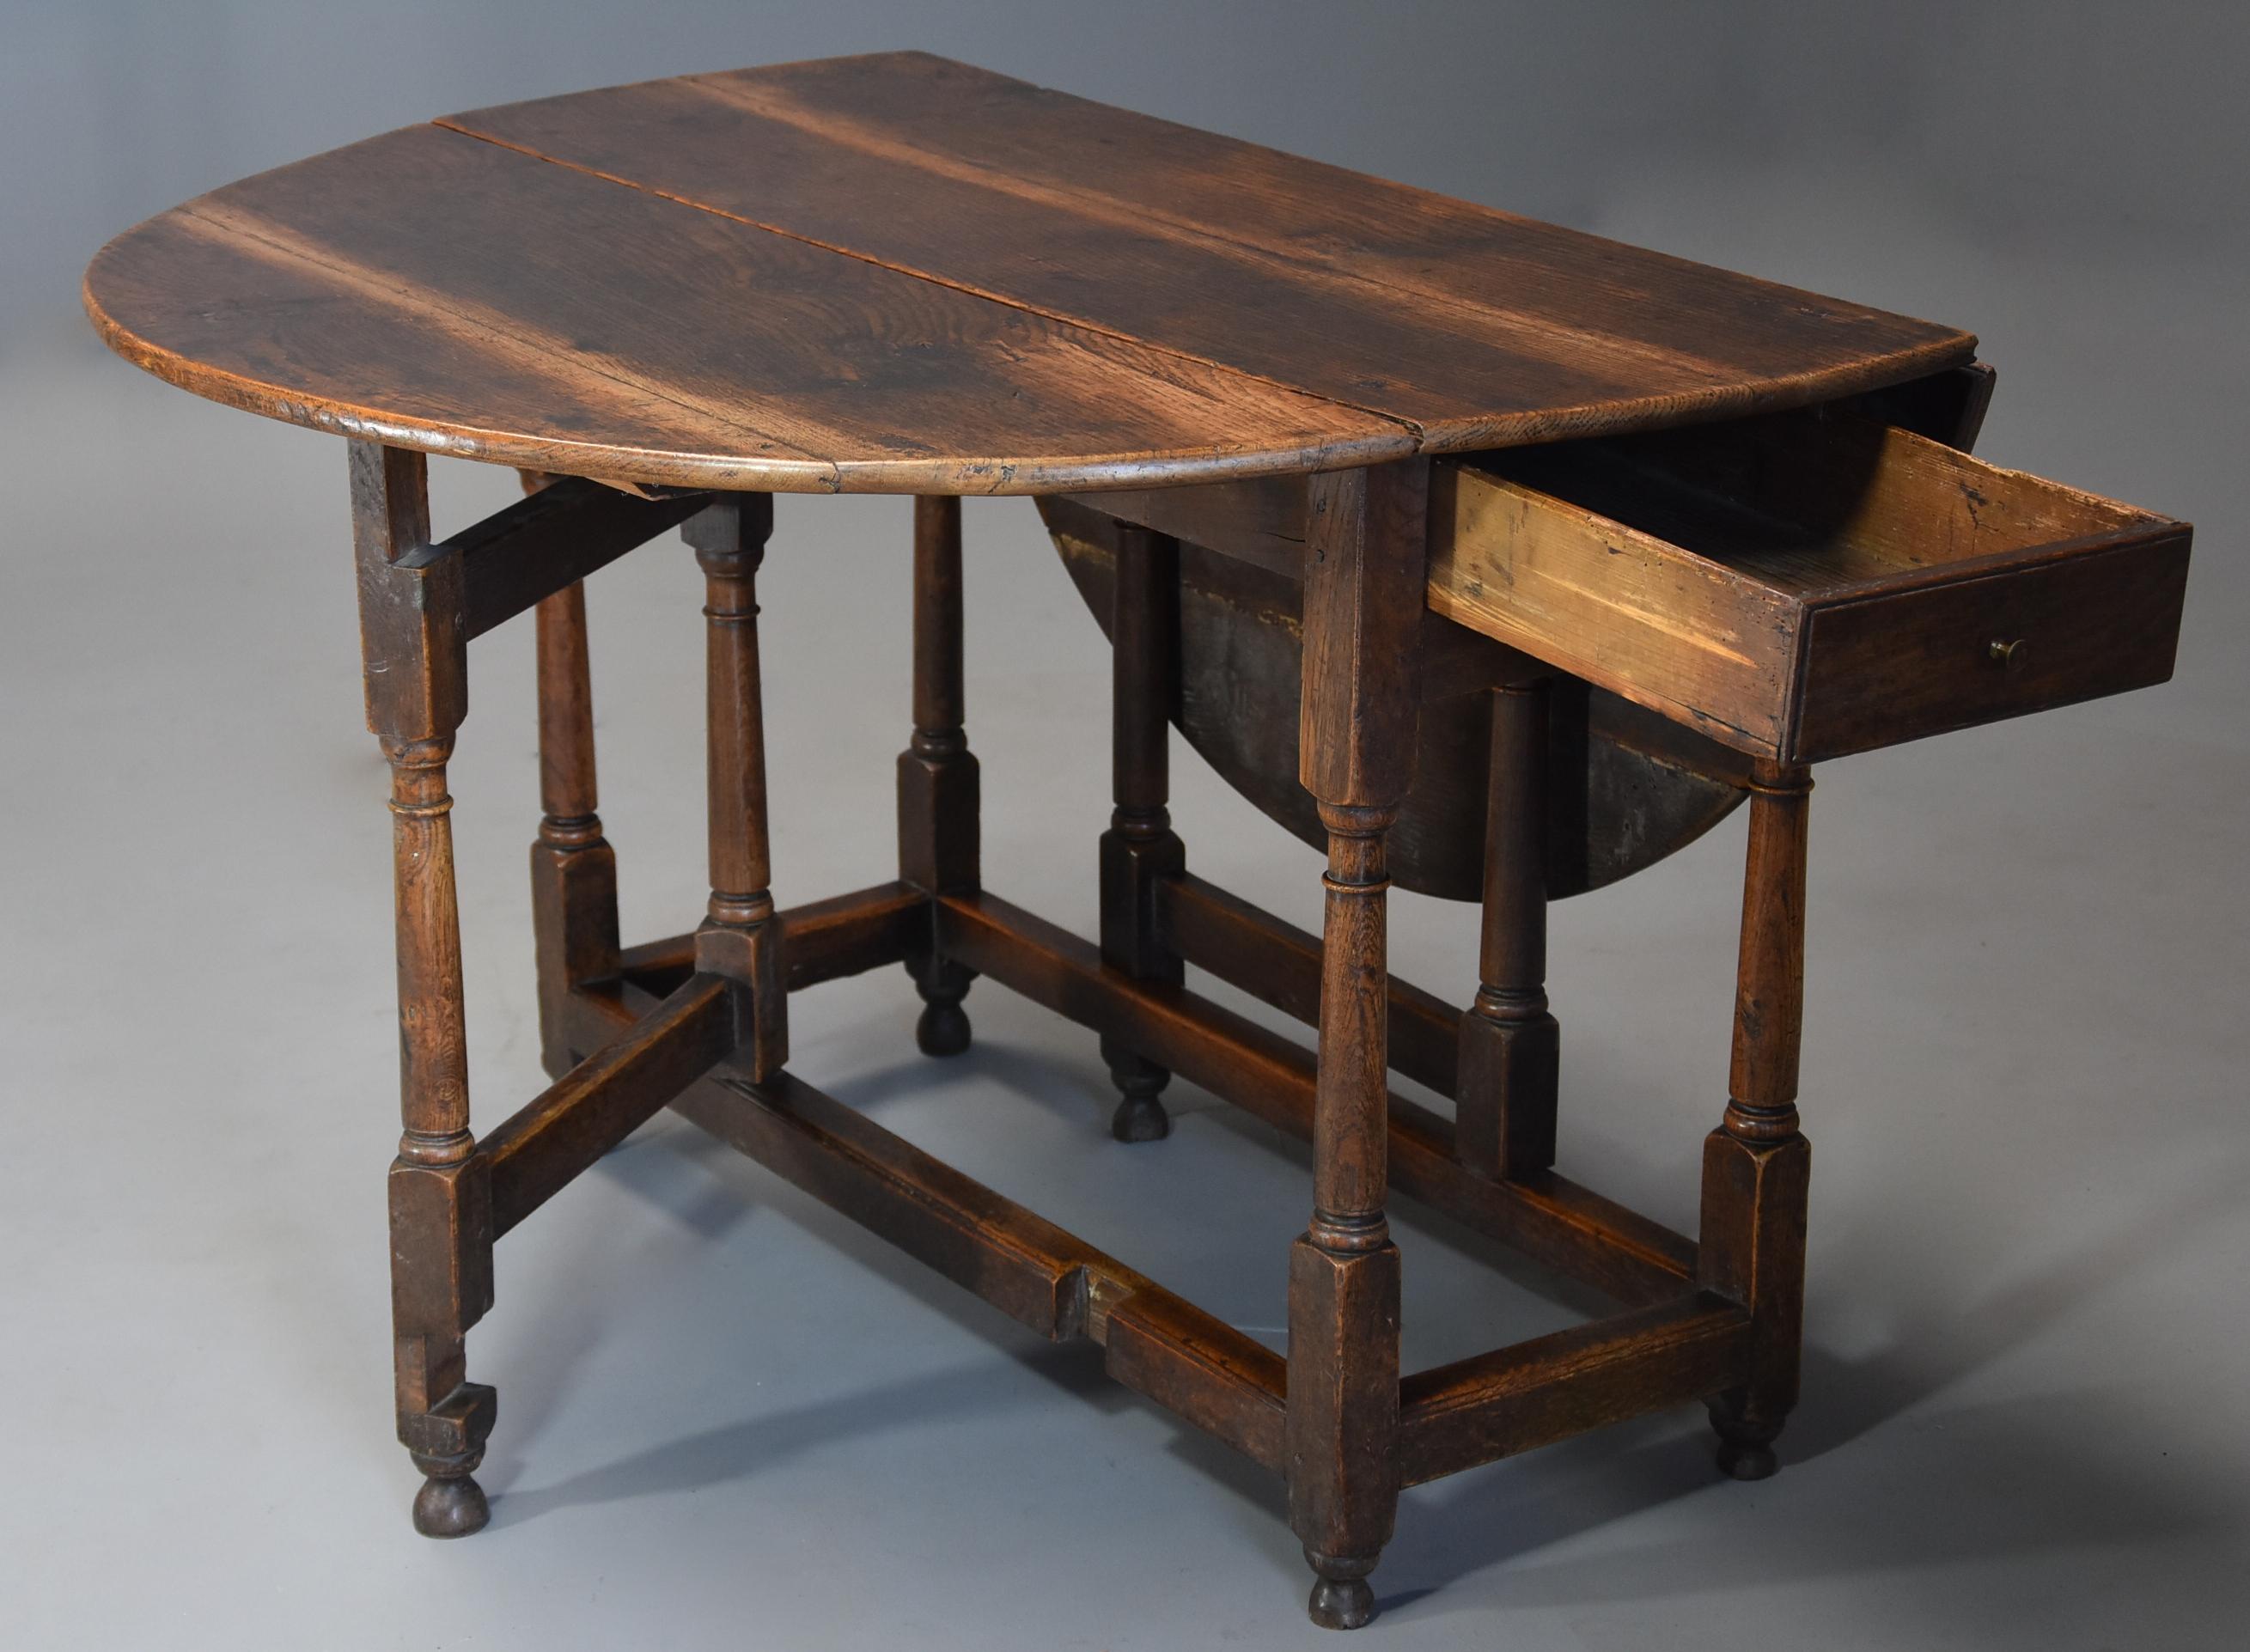 English Early 18th Century Oak Gateleg Table with Superb Original Patina For Sale 2